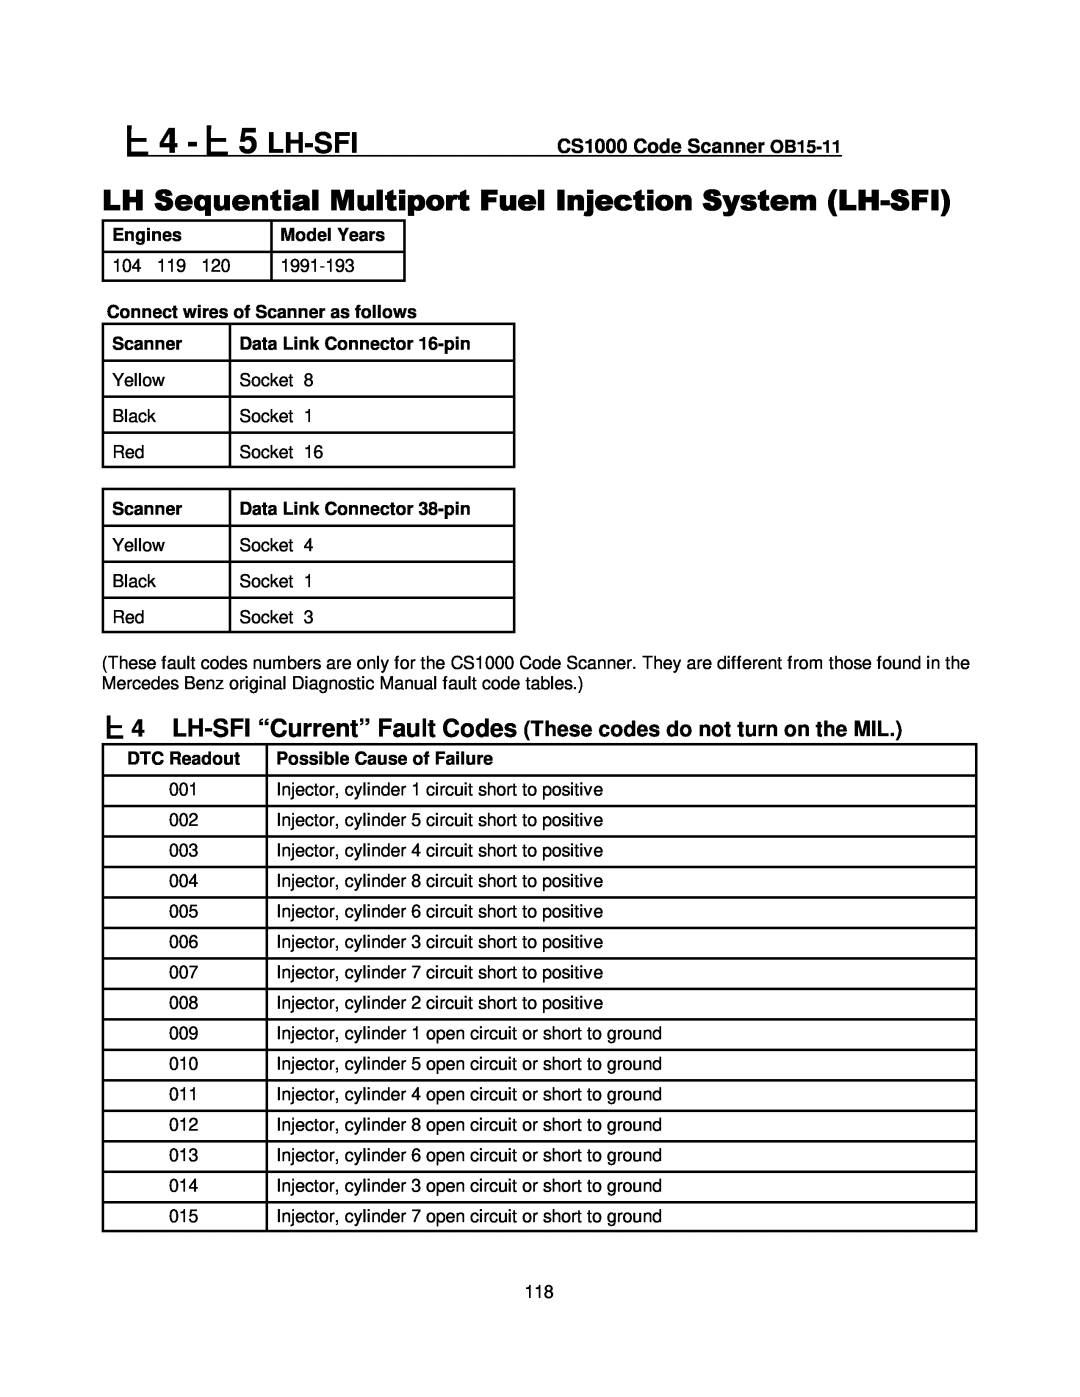 Mercedes-Benz CS1000 manual LH-SFI “Current” Fault Codes These codes do not turn on the MIL, Engines, Model Years, Scanner 